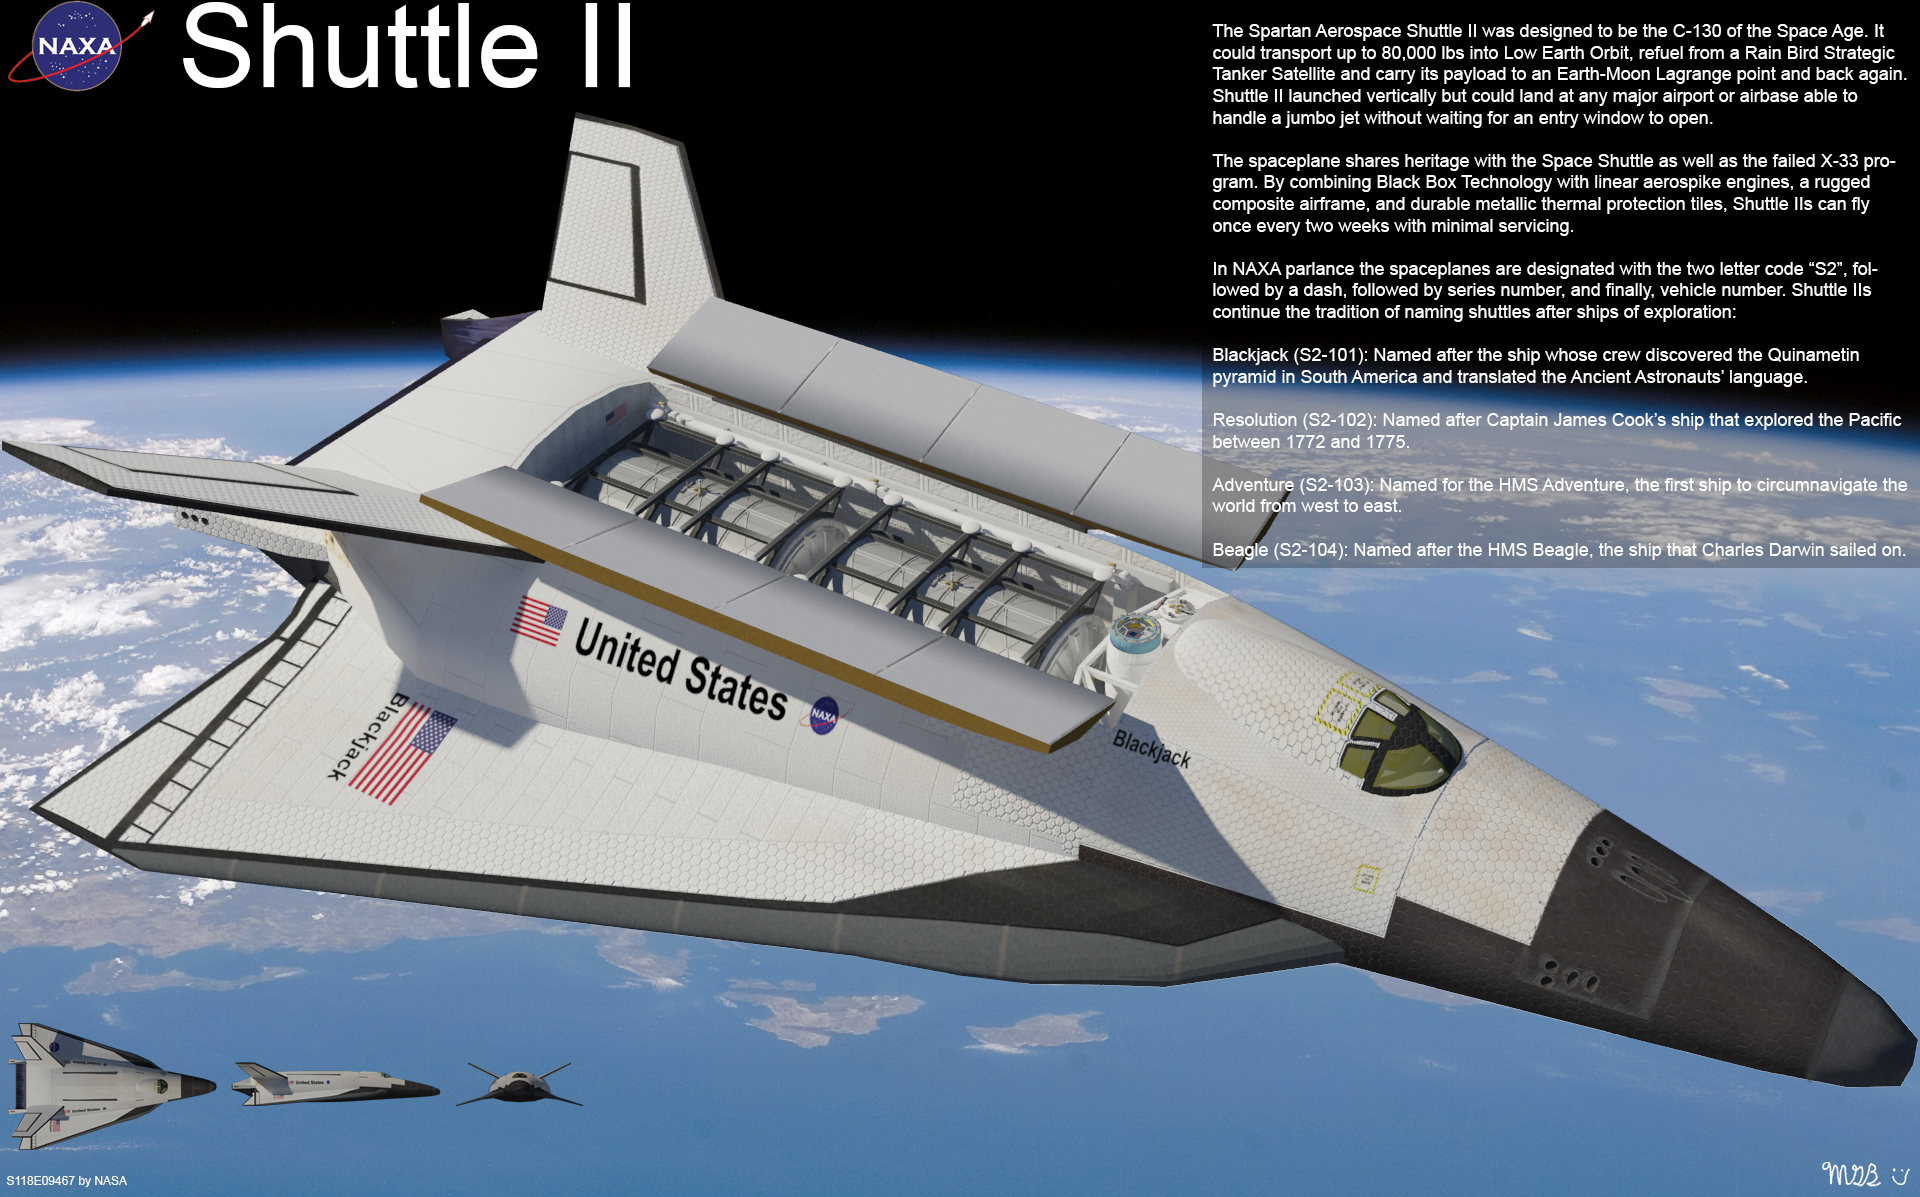 Shuttle II, the successor to the Space Transportation System